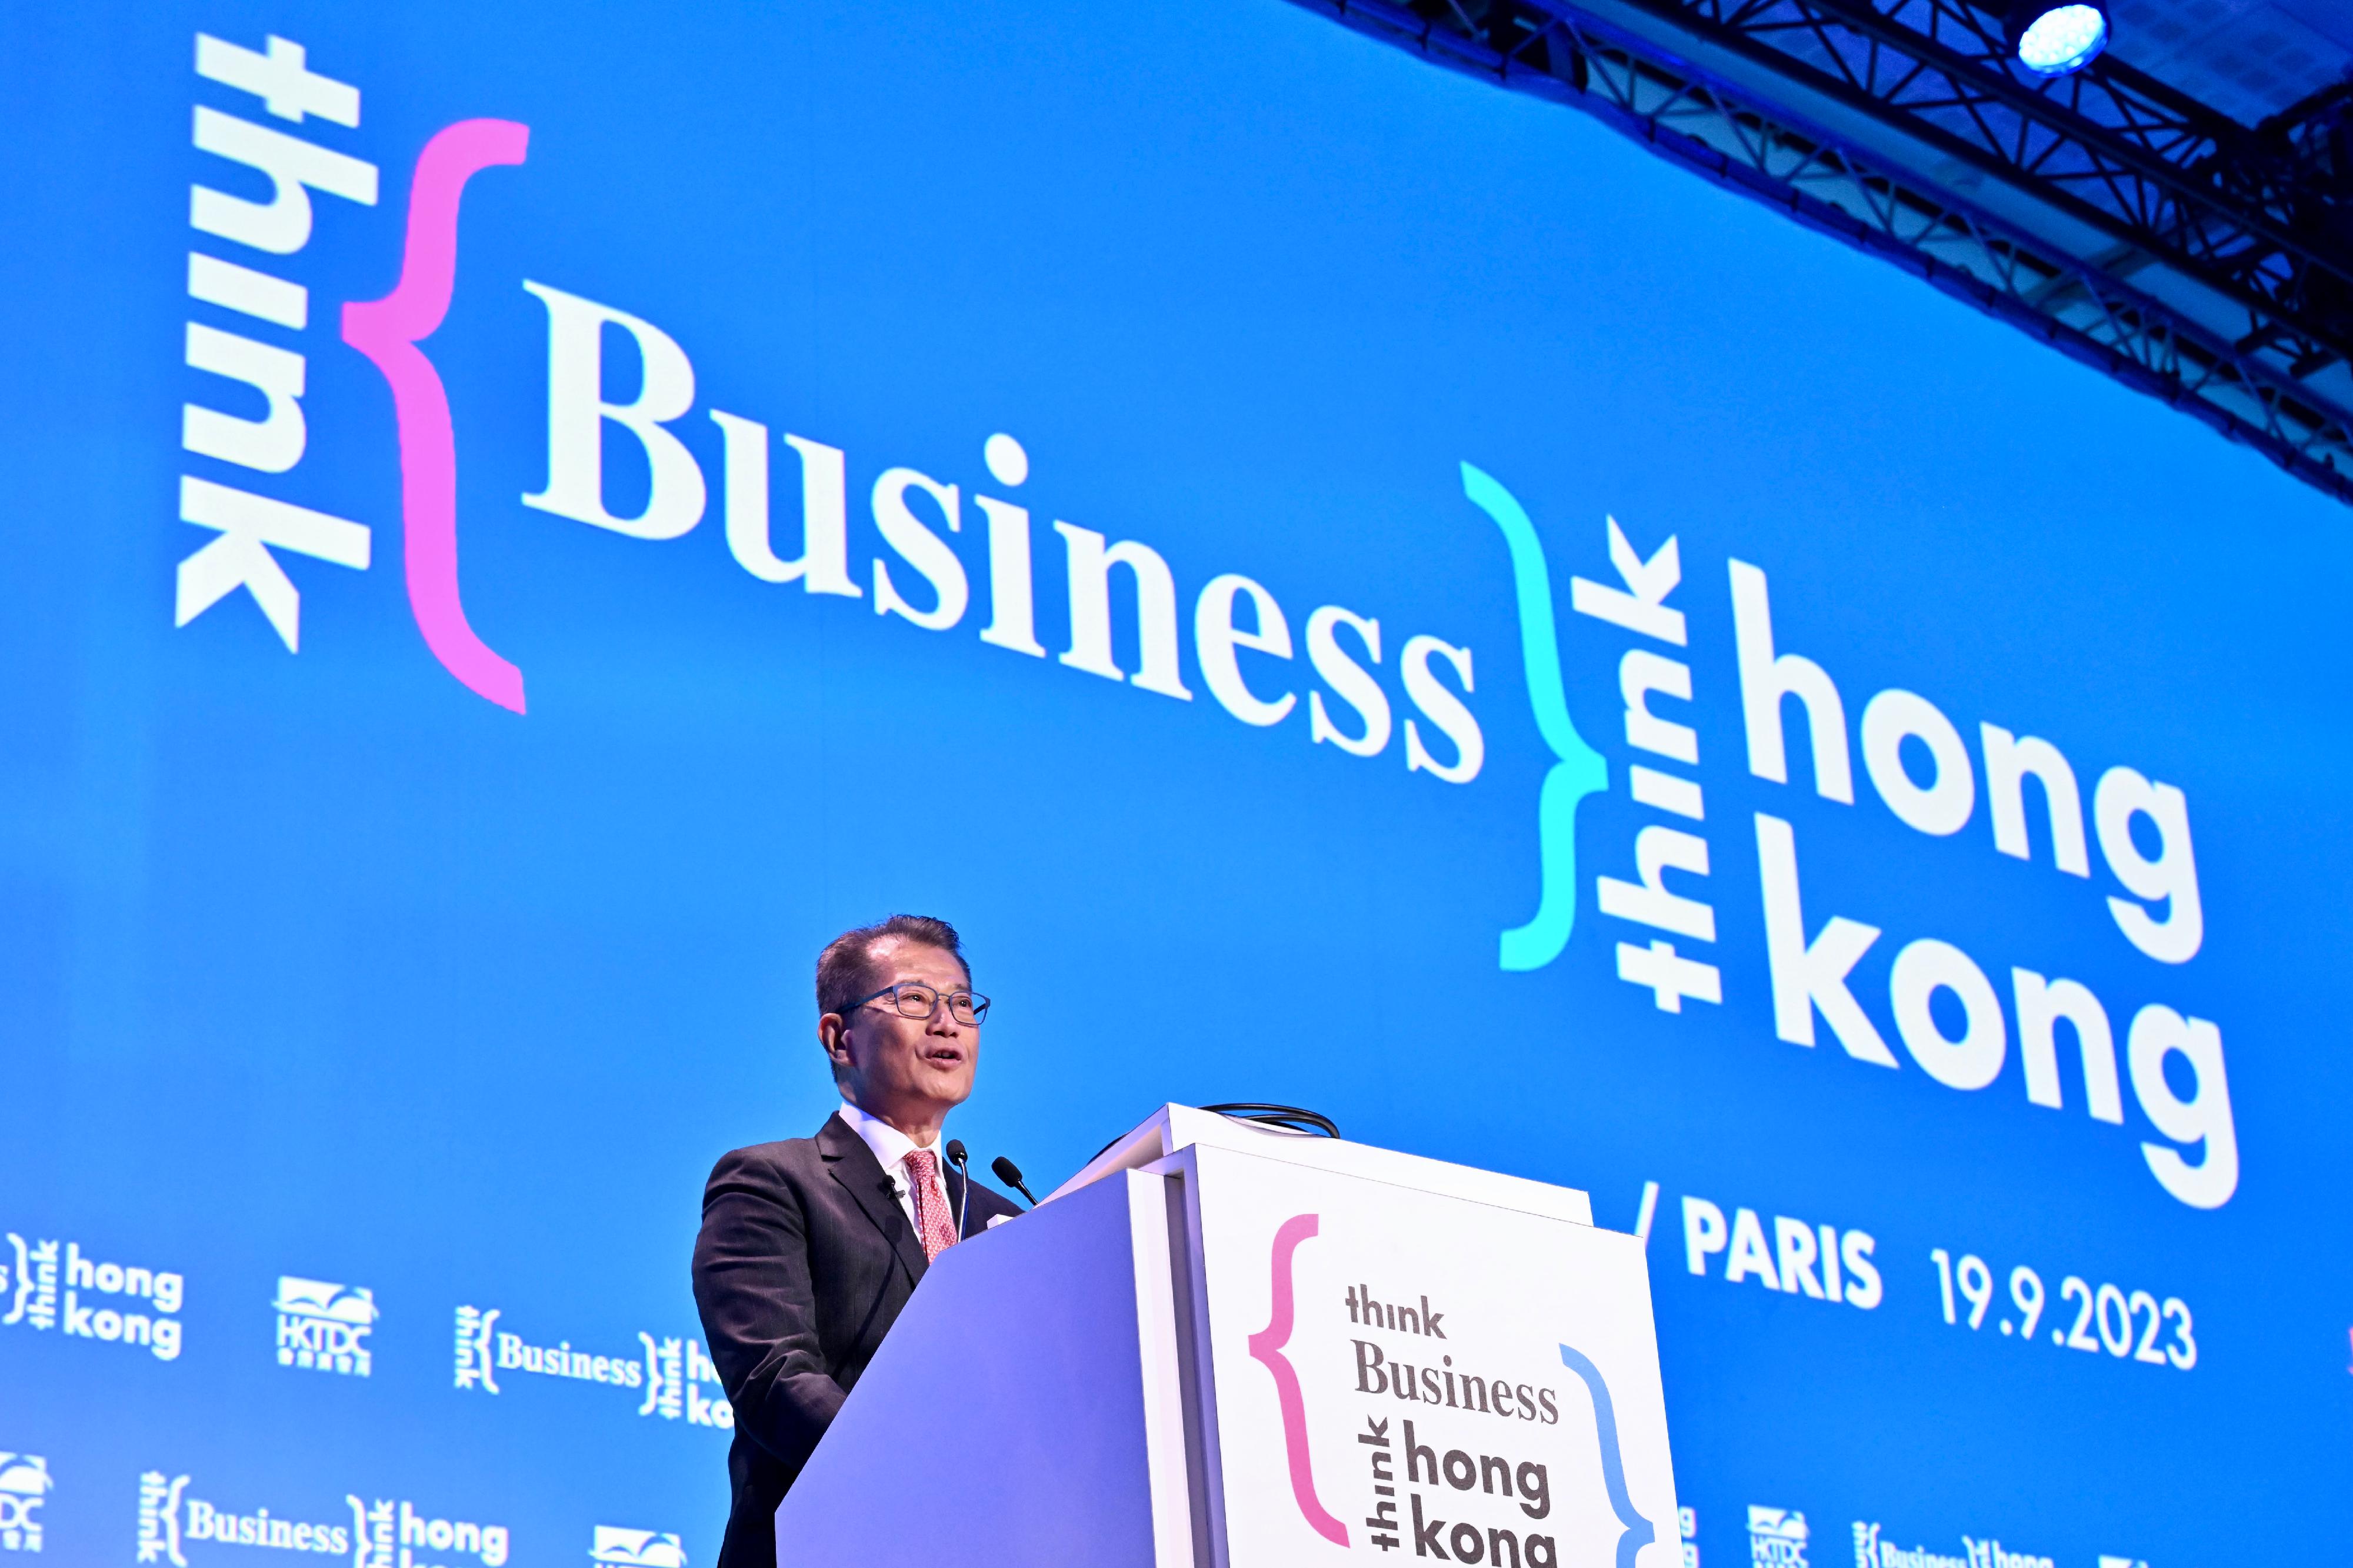 The Financial Secretary, Mr Paul Chan, continued his visit to Paris, France, today (September 19, Paris time). At the Think Business Think Hong Kong Symposium he attended this morning, Mr Chan introduced the new developments and advantages of Hong Kong to industrial and commercial sectors in France. Photo shows Mr Chan delivering a speech at the symposium.